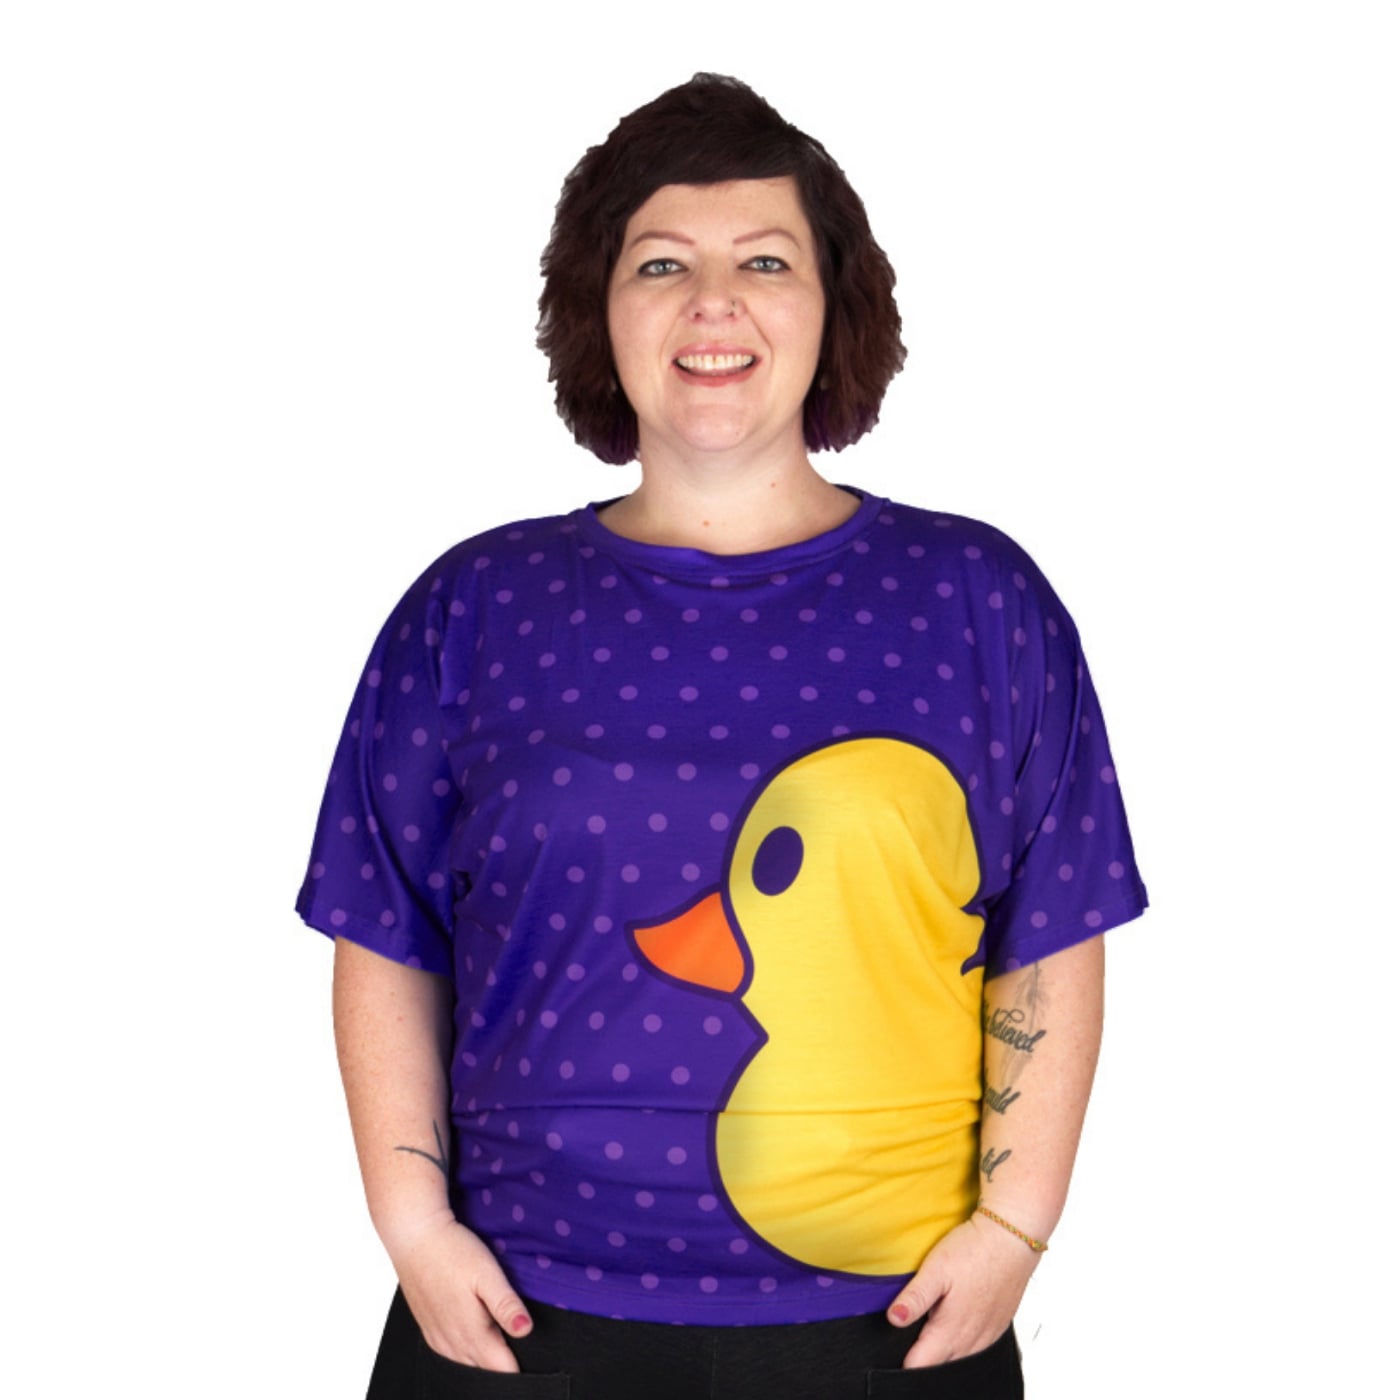 Yellow Ducky Batwing Top by RainbowsAndFairies.com.au (Yellow Duck - Rubber Duck - Ducky - Purple - Vintage Inspired - Kitsch - Knit Top - Mod) - SKU: CL_BATOP_DUCKY_YEL - Pic-03